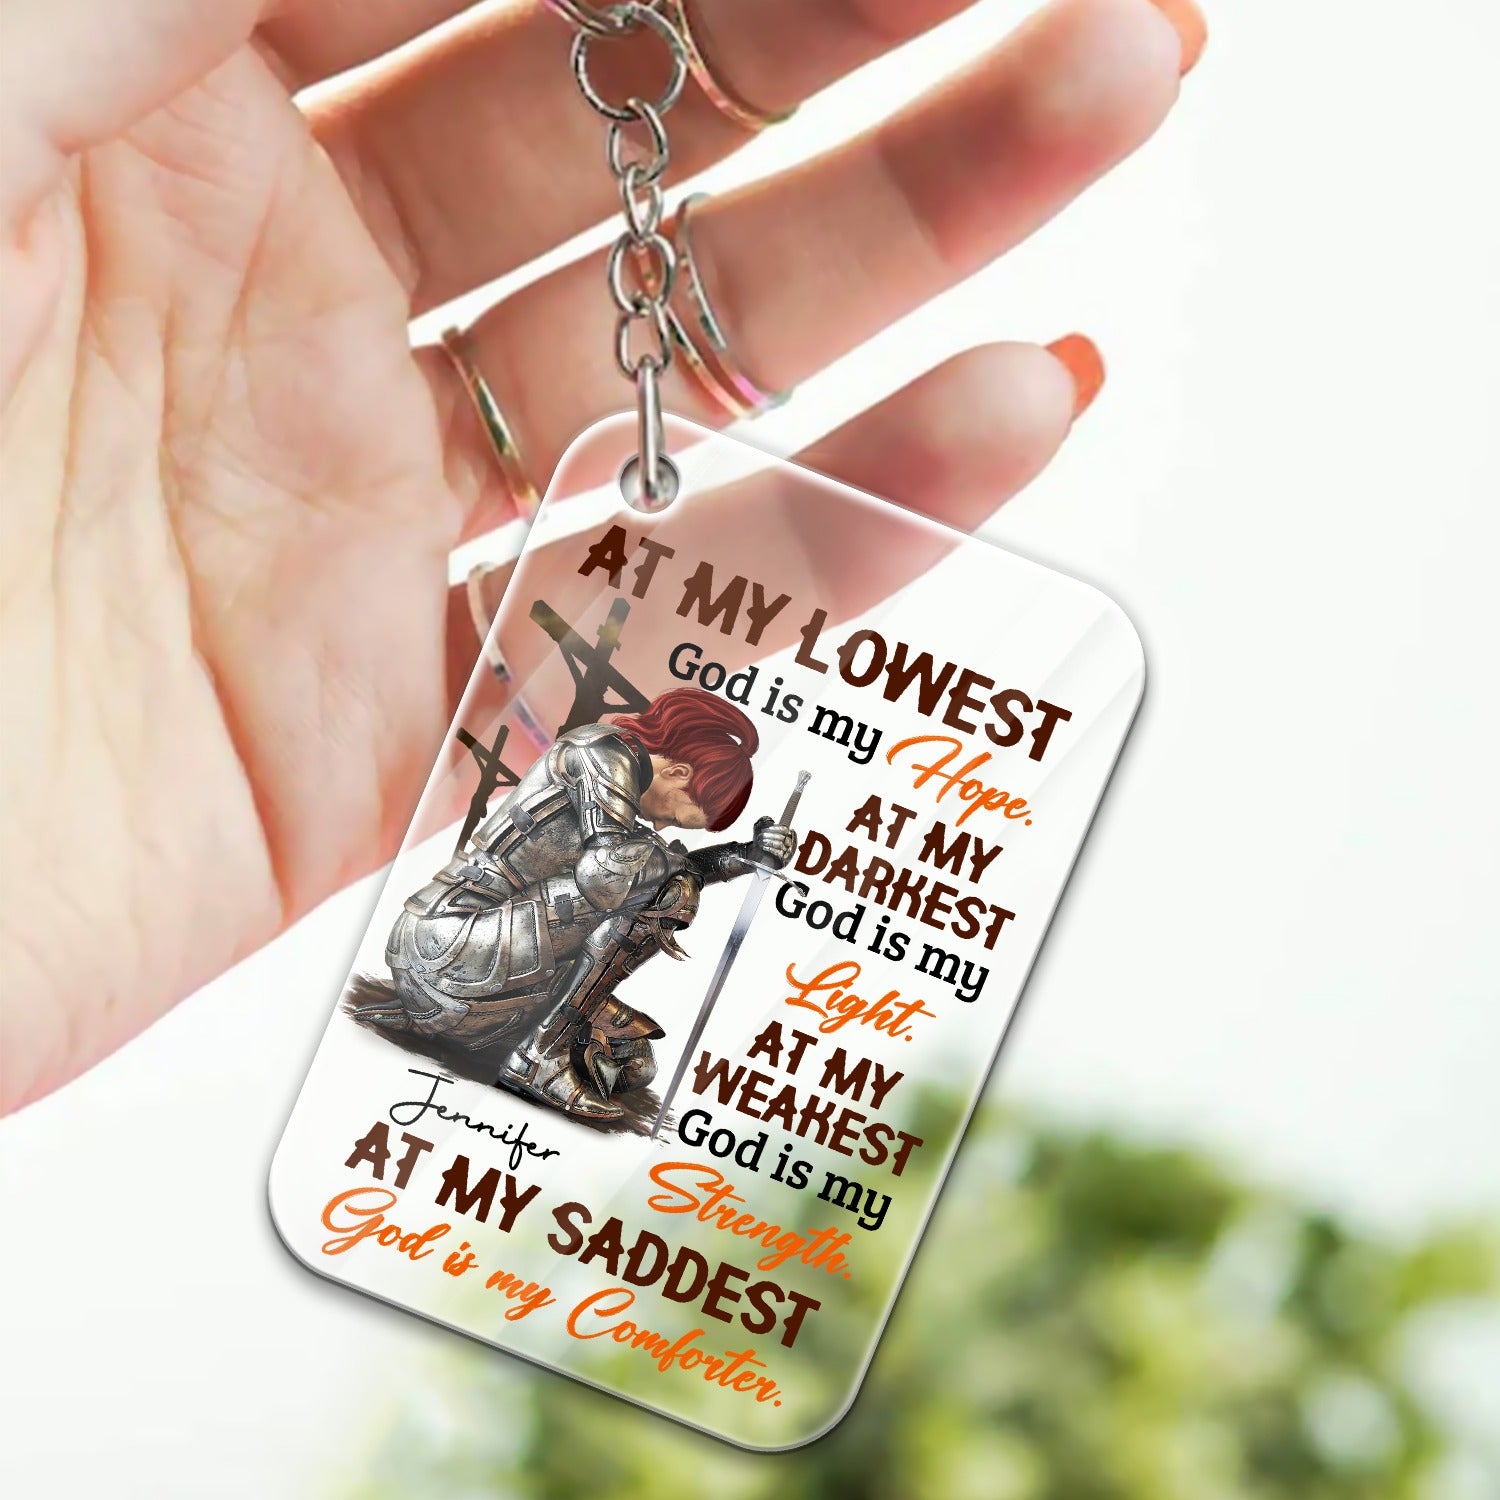 Personalized Woman Warrior Of God At My Lowest God Is My Hope At My Darkest God Is My Light Acrylic Keychain